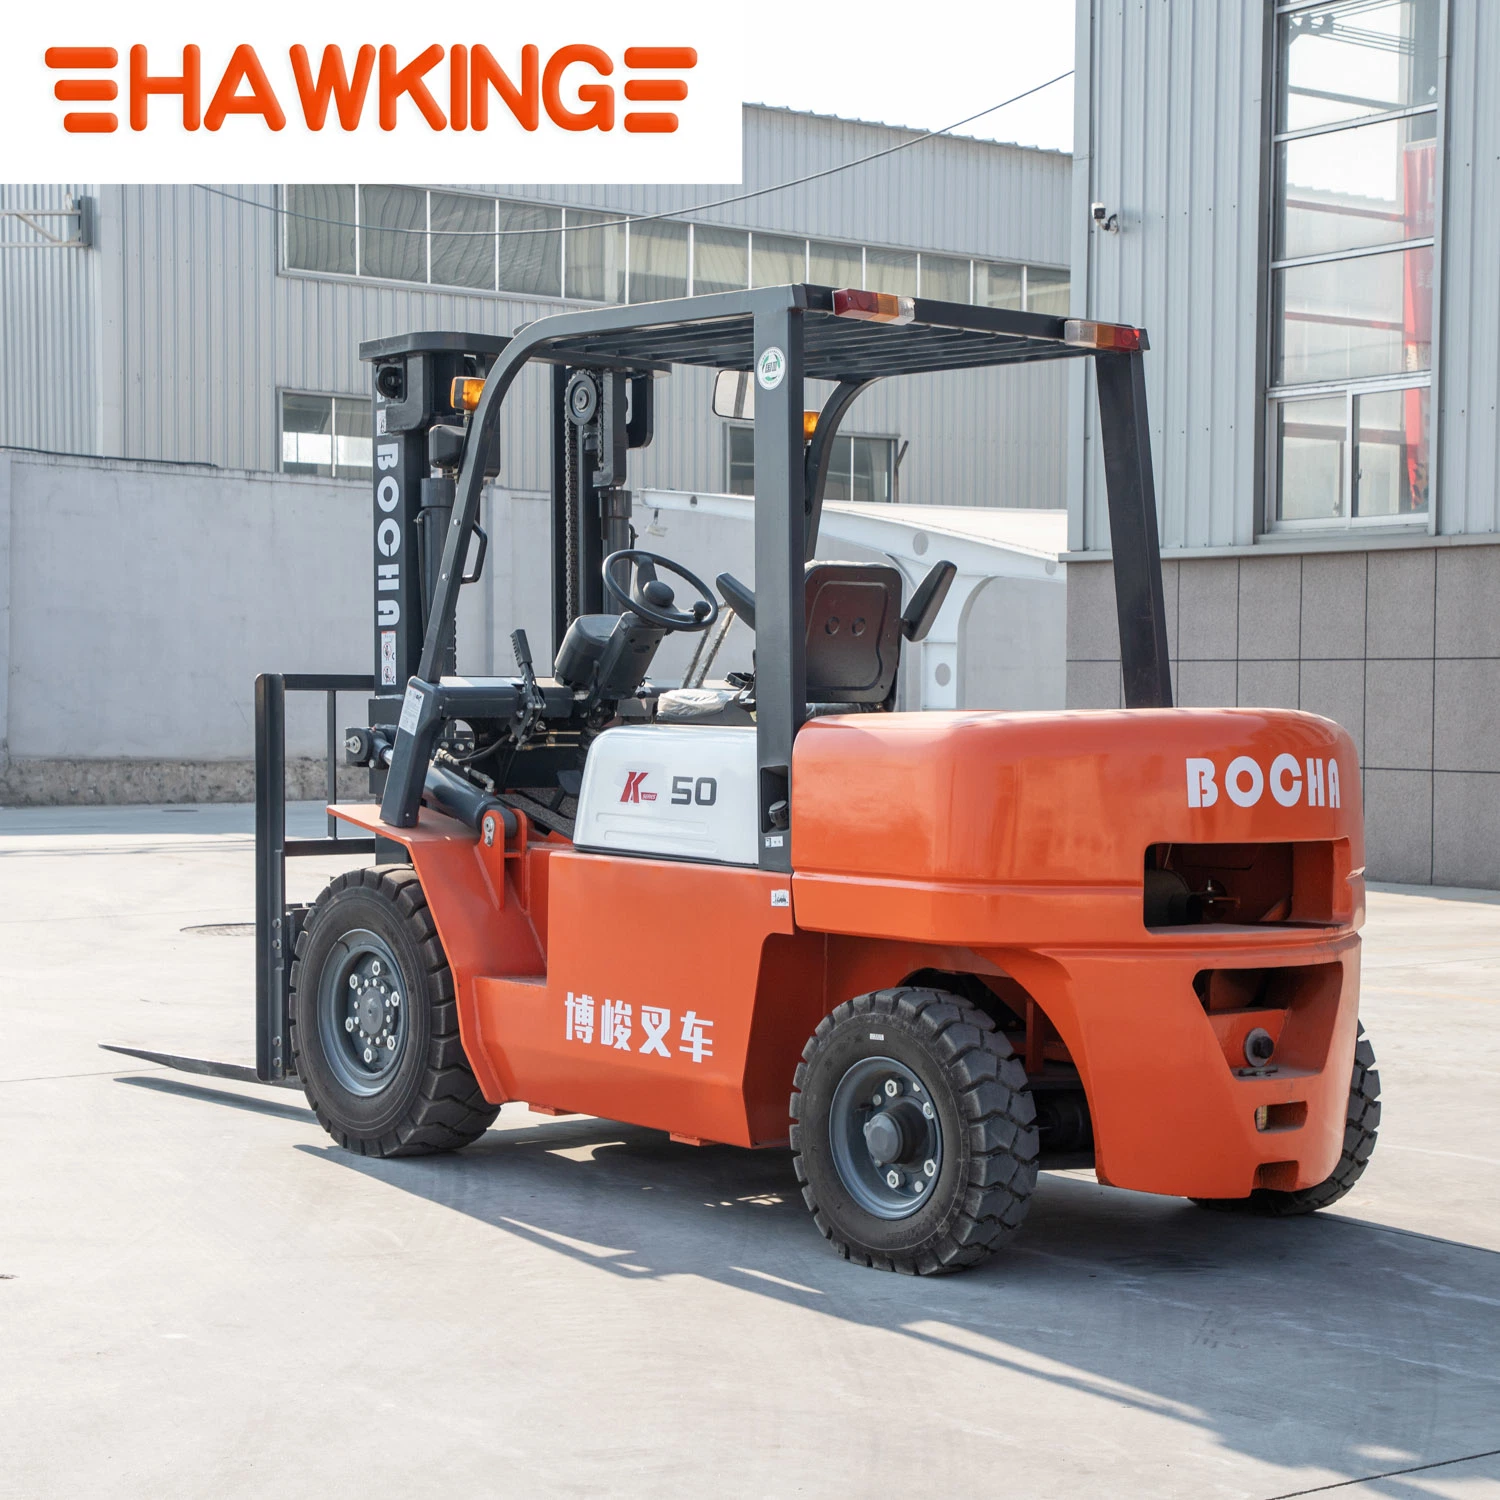 China Diesel Hydraulic Forklift 5 Ton Fork Lift Four Wheels 3m 4.5 Meters Lifting Height Motor Counter Balance Side Shift Automatic Transmission Euro V 5 Engine